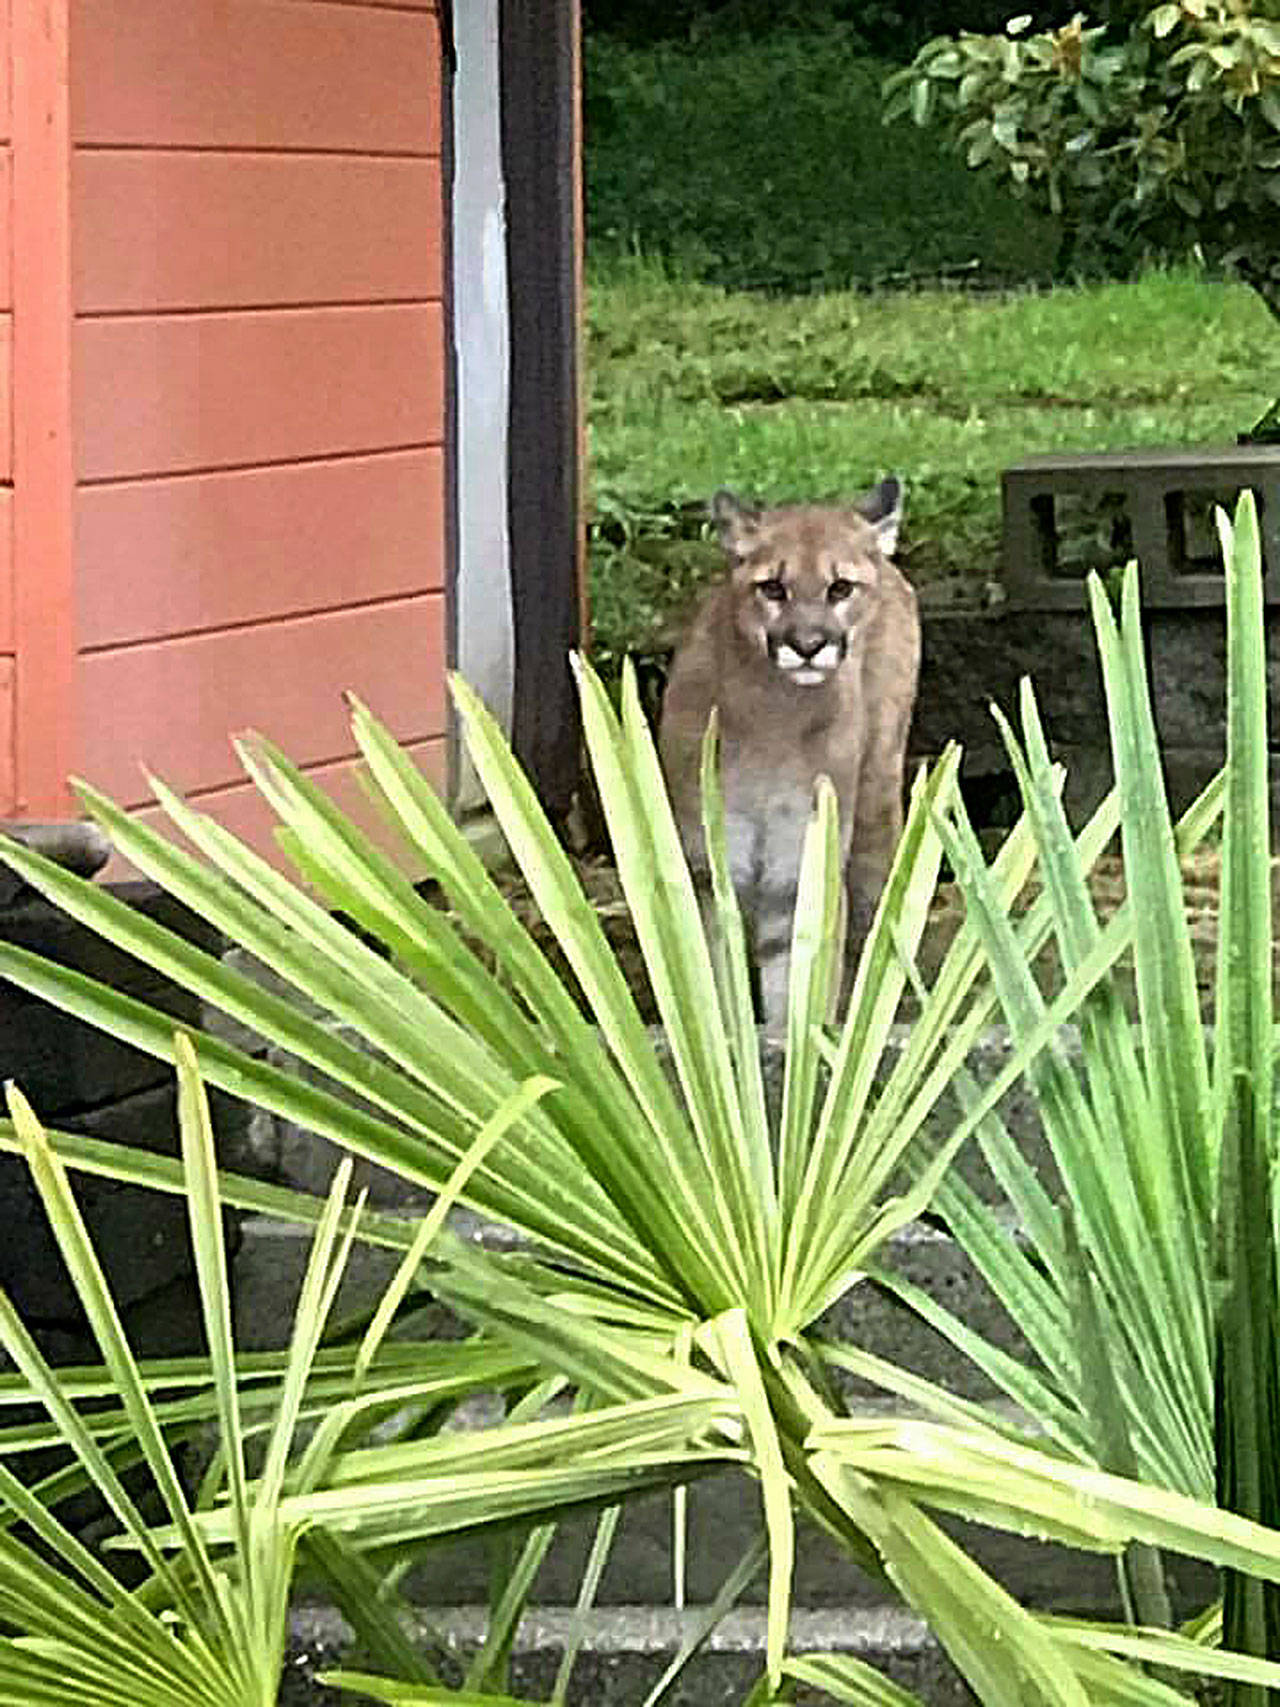 (Photo courtesy Brian Braaten) This cougar made its way into the backyard of a home on Earl Street at the top of Scammel Hill in Aberdeen in June of 2017.